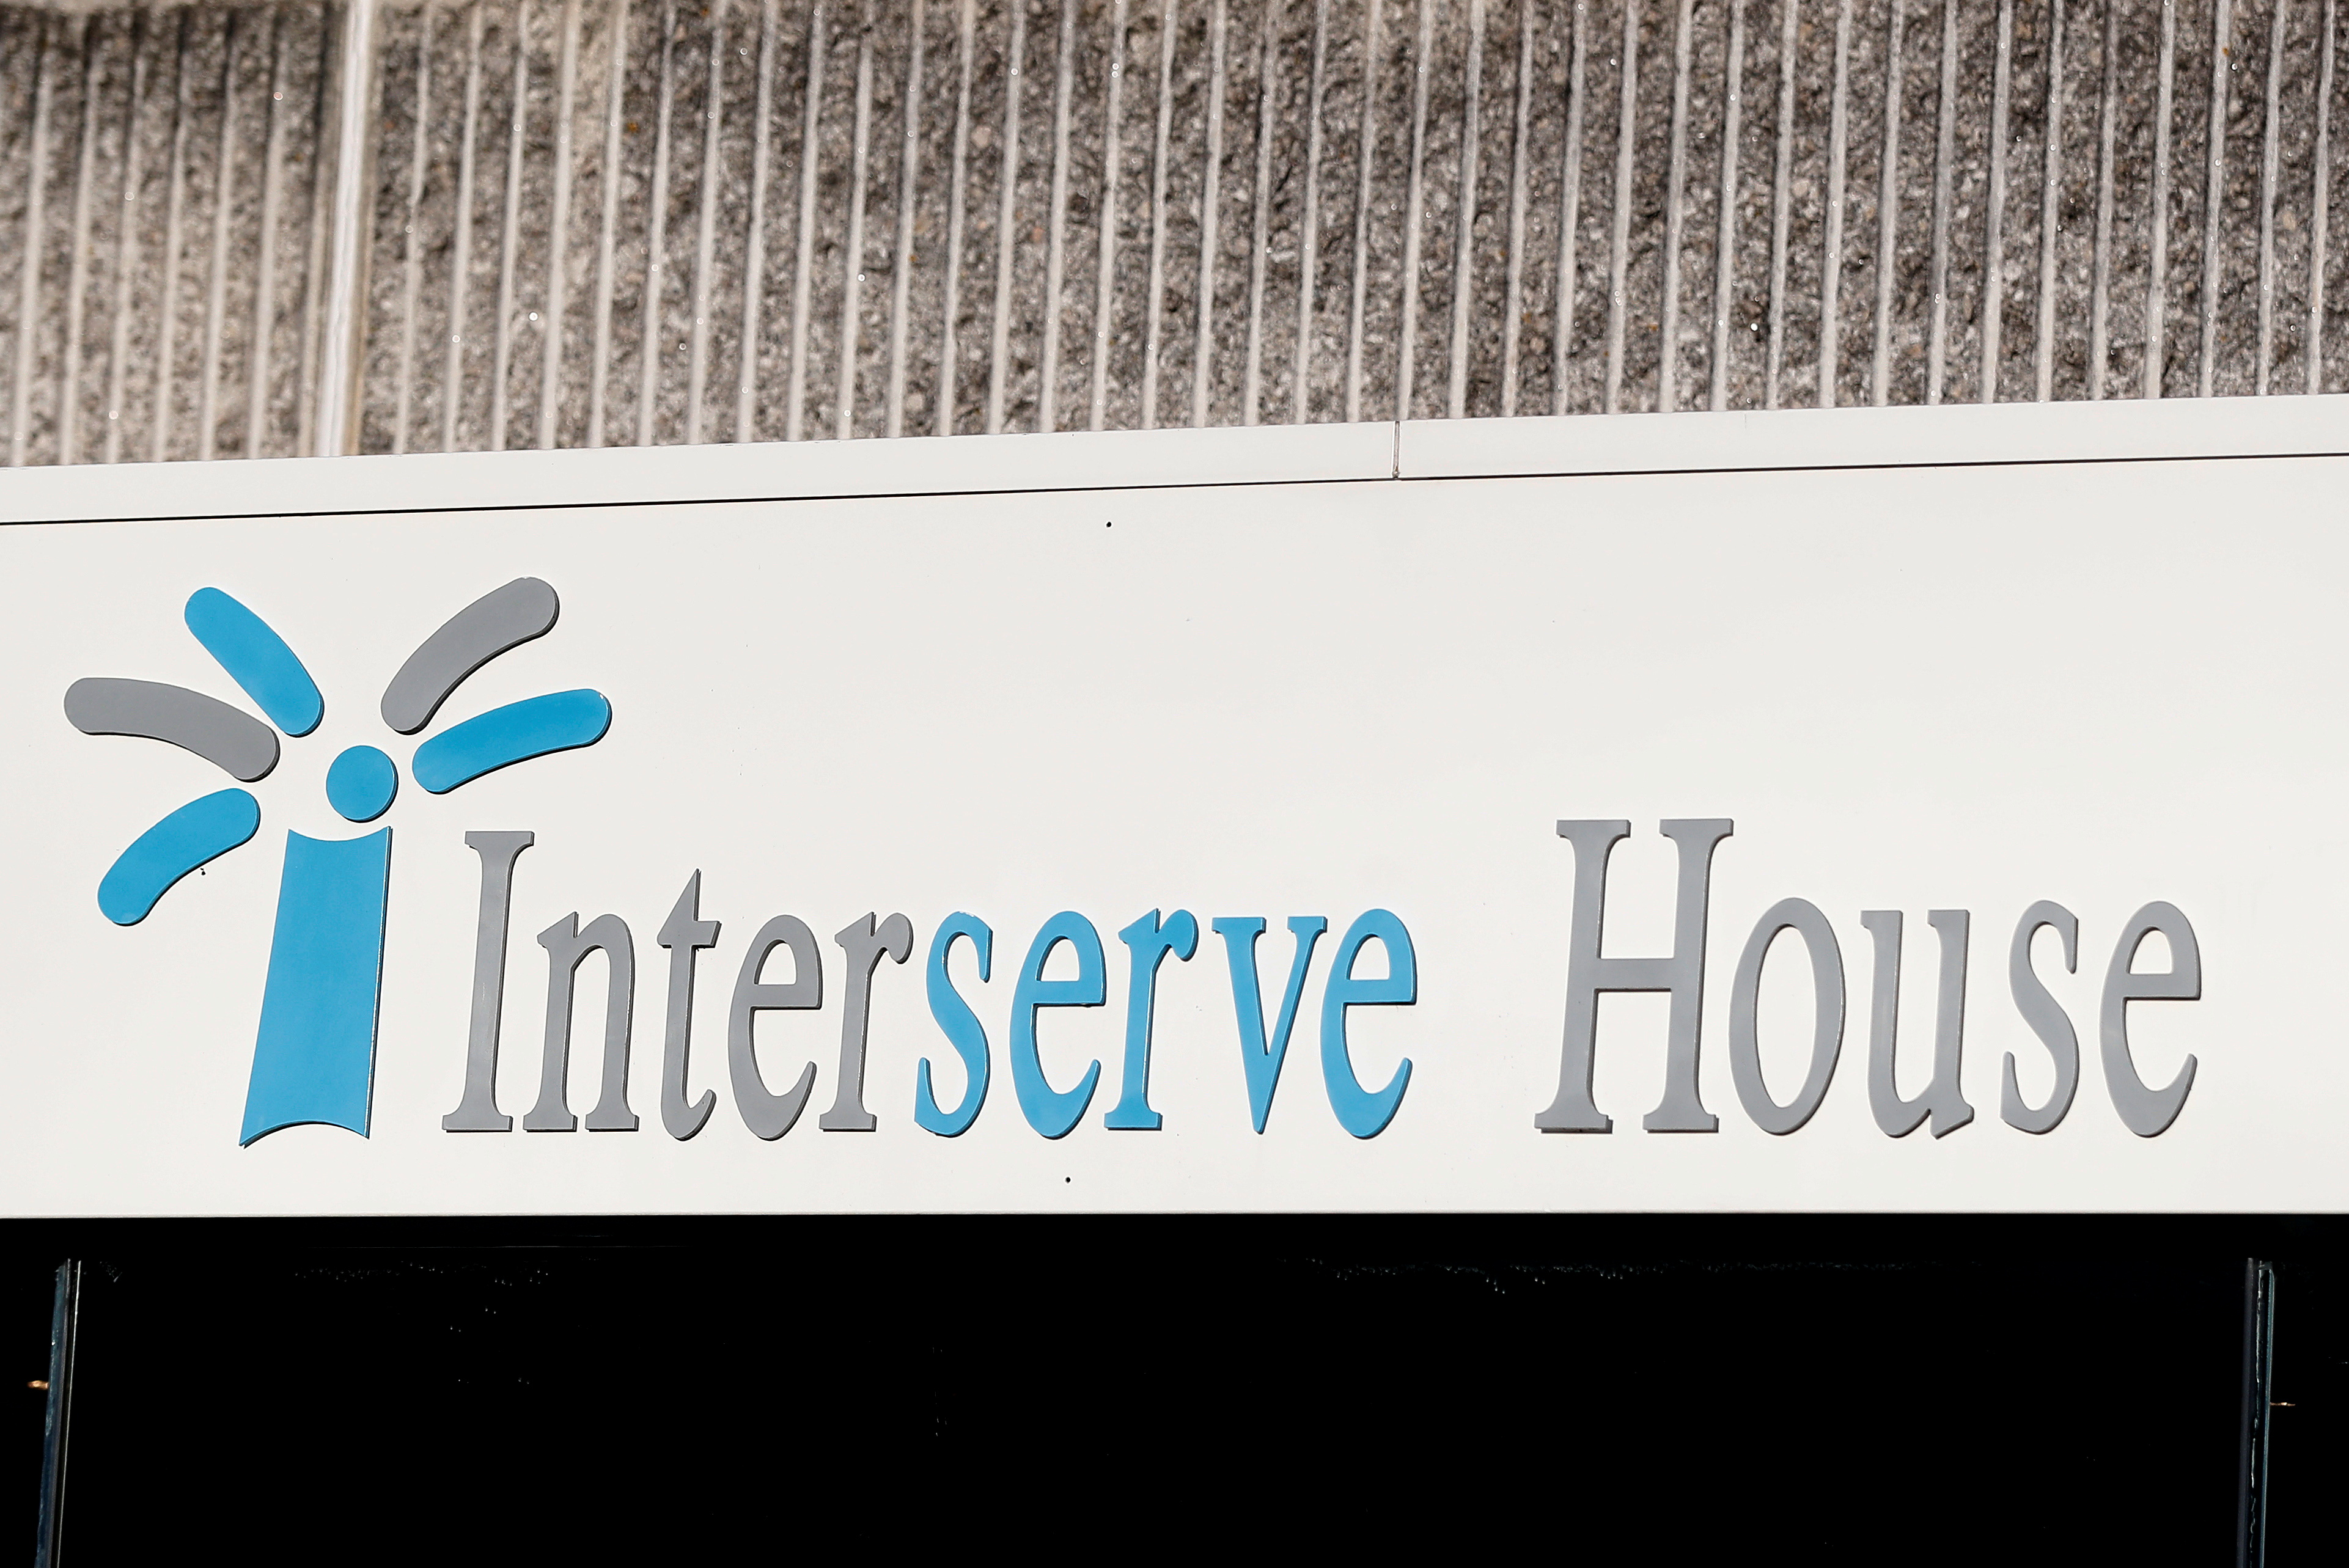 Interserve offices are seen in Twyford